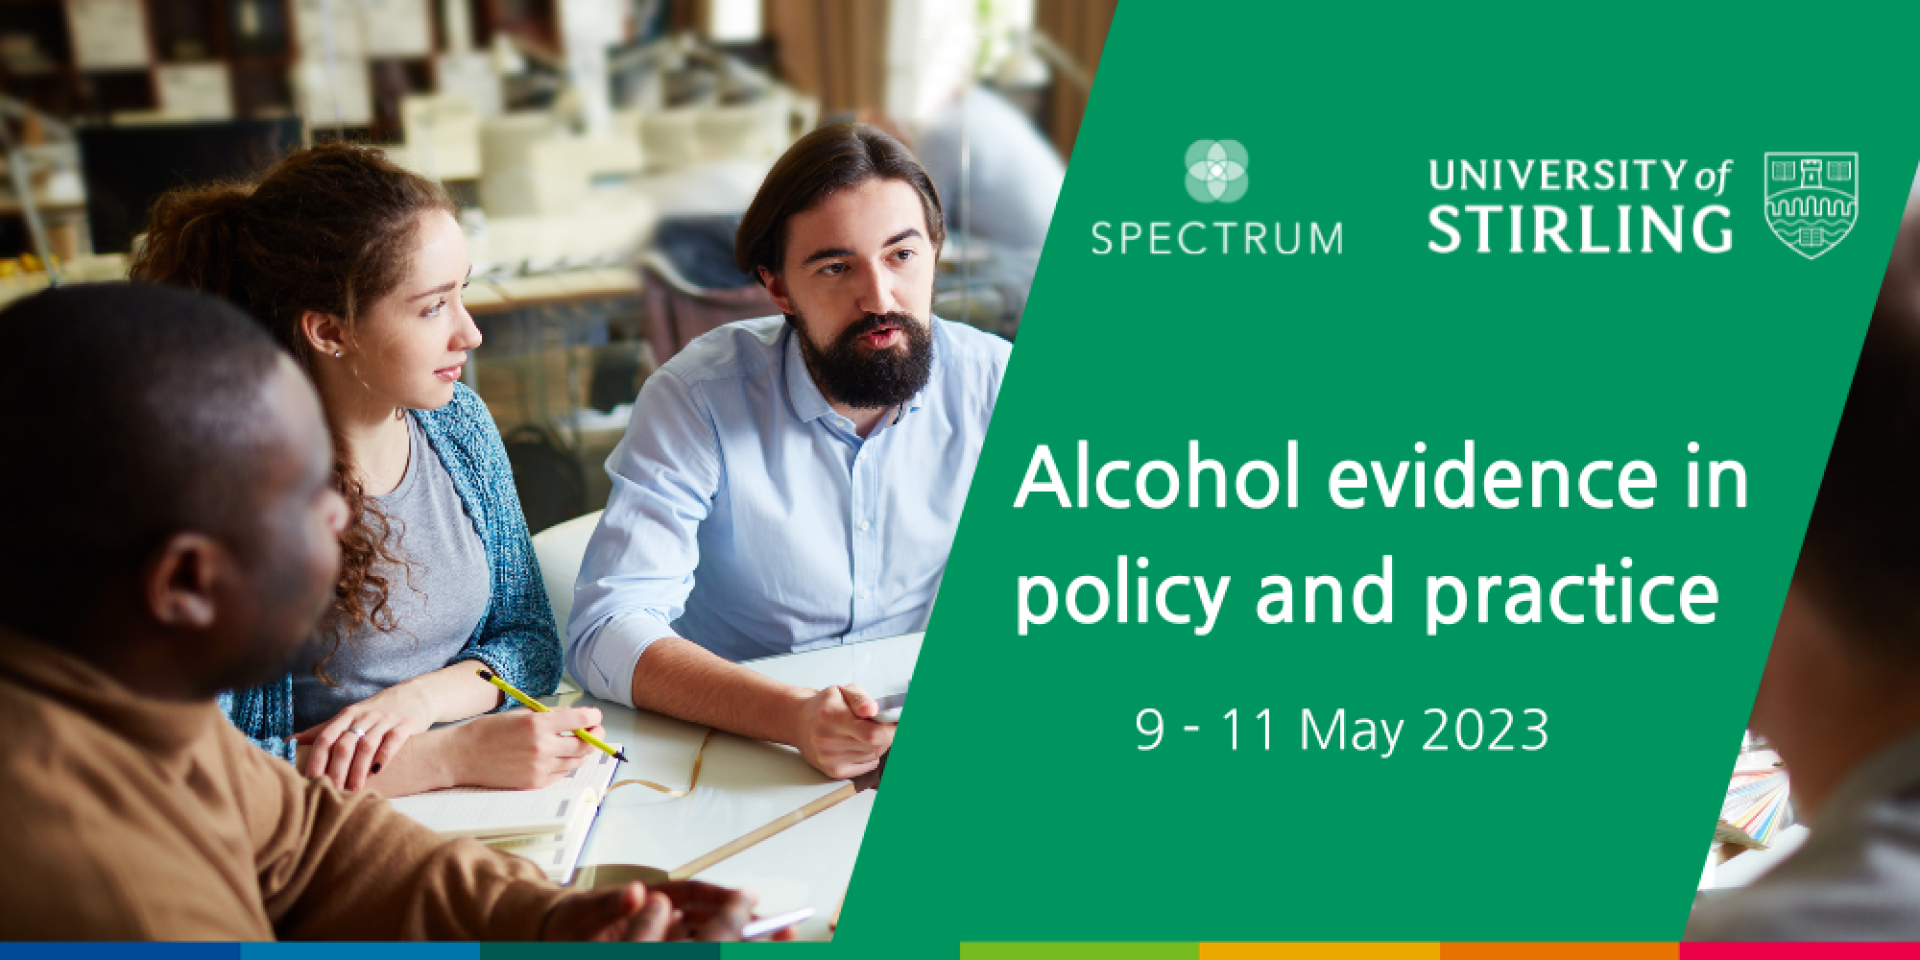 Group of people in discussion with text over top which reads "Alcohol evidence in policy and practice" with SPECTRUM and University of Stirling logos in top right corner